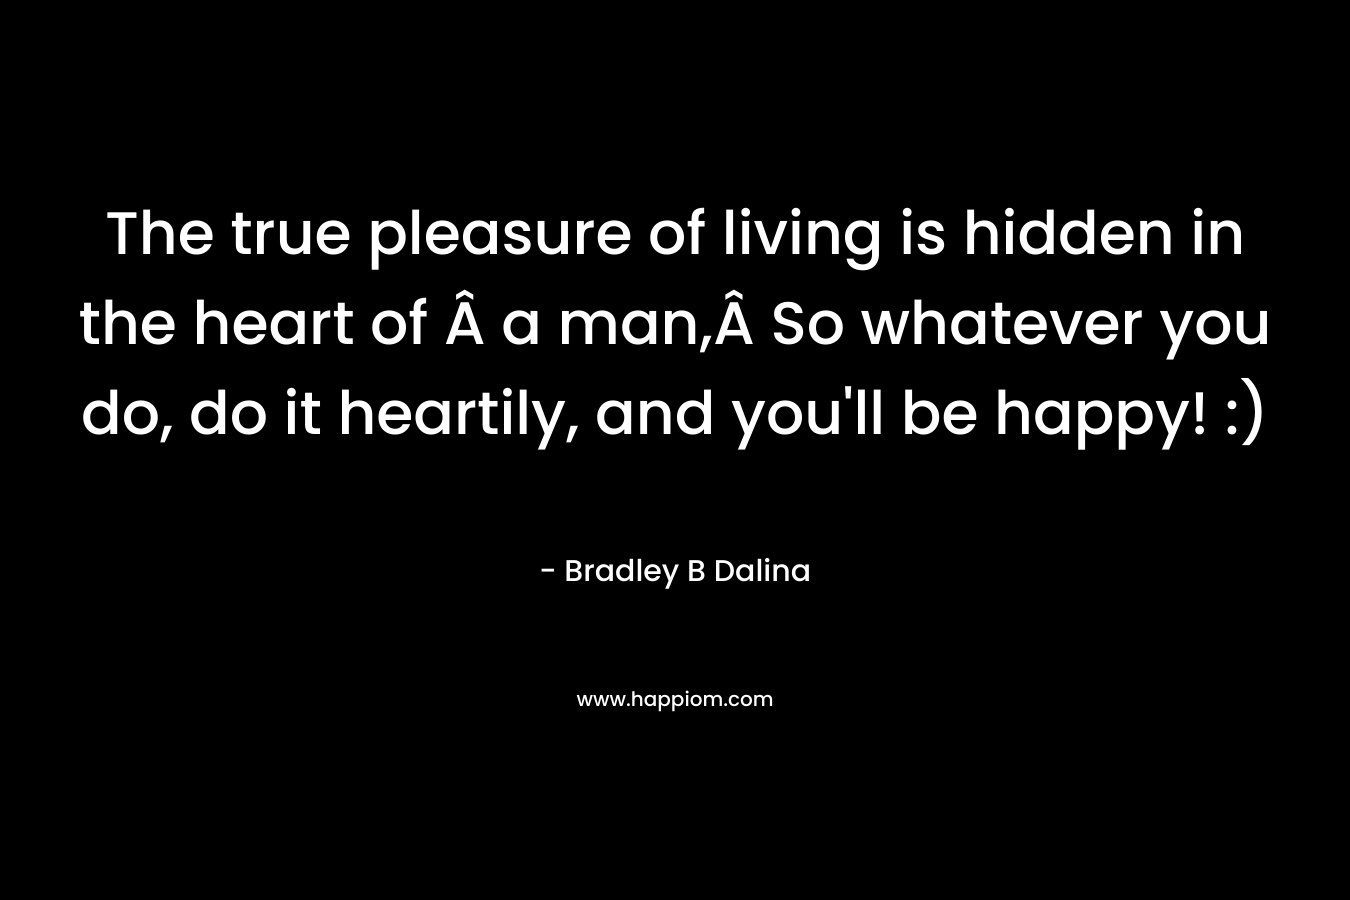 The true pleasure of living is hidden in the heart of Â a man,Â So whatever you do, do it heartily, and you'll be happy! :)